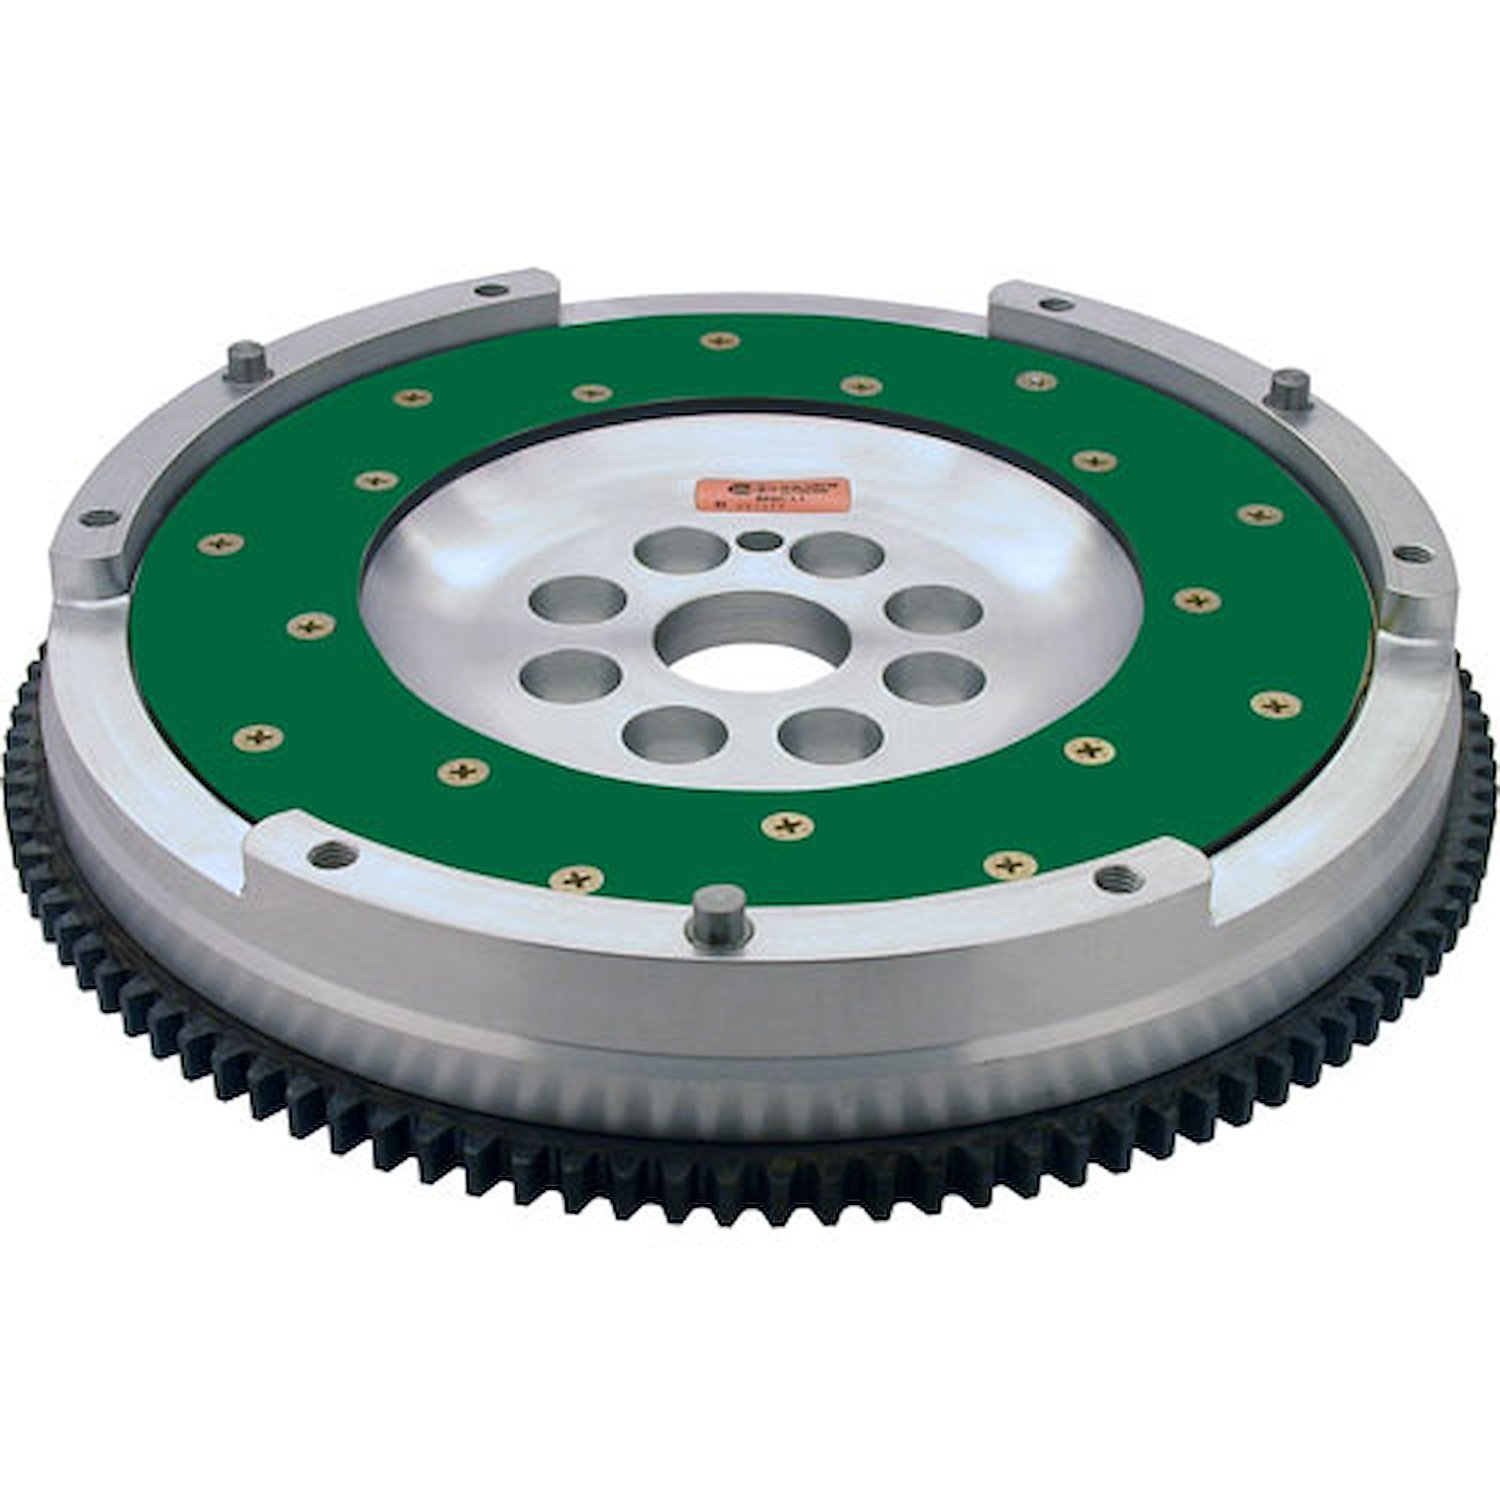 Engineering Corp. - Flywheel-Aluminum PC Hy5 High Performance Lightweight with Replaceable Friction Plate